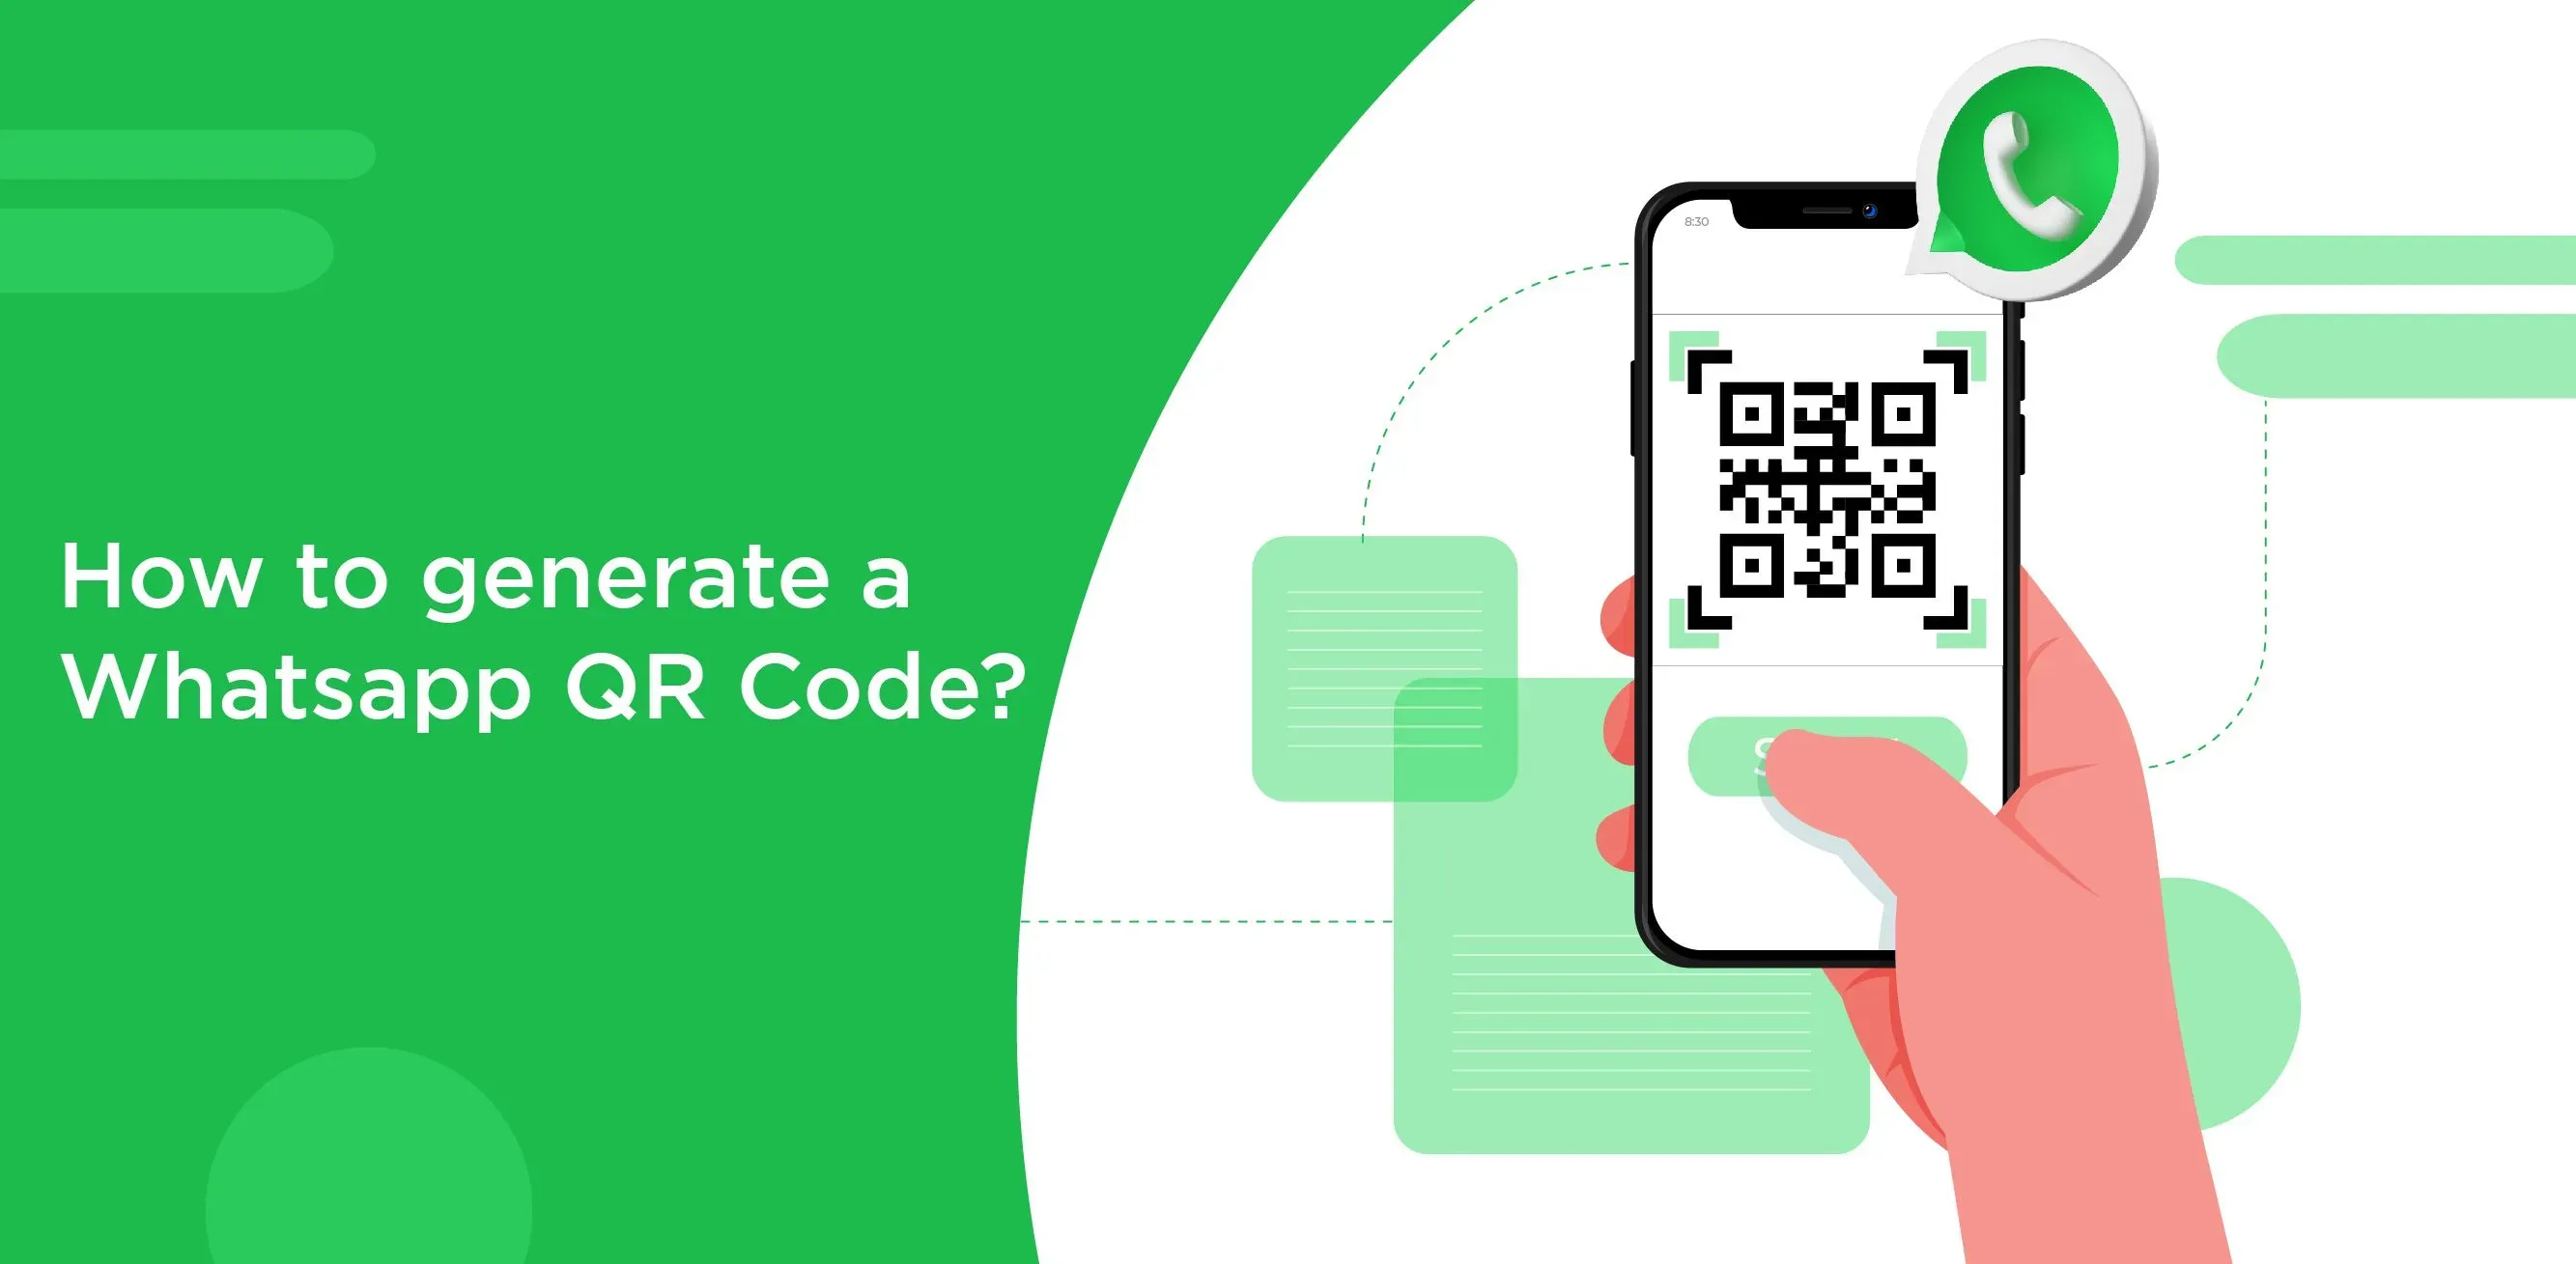 Log in to Bitrix24 on your computer using QR code